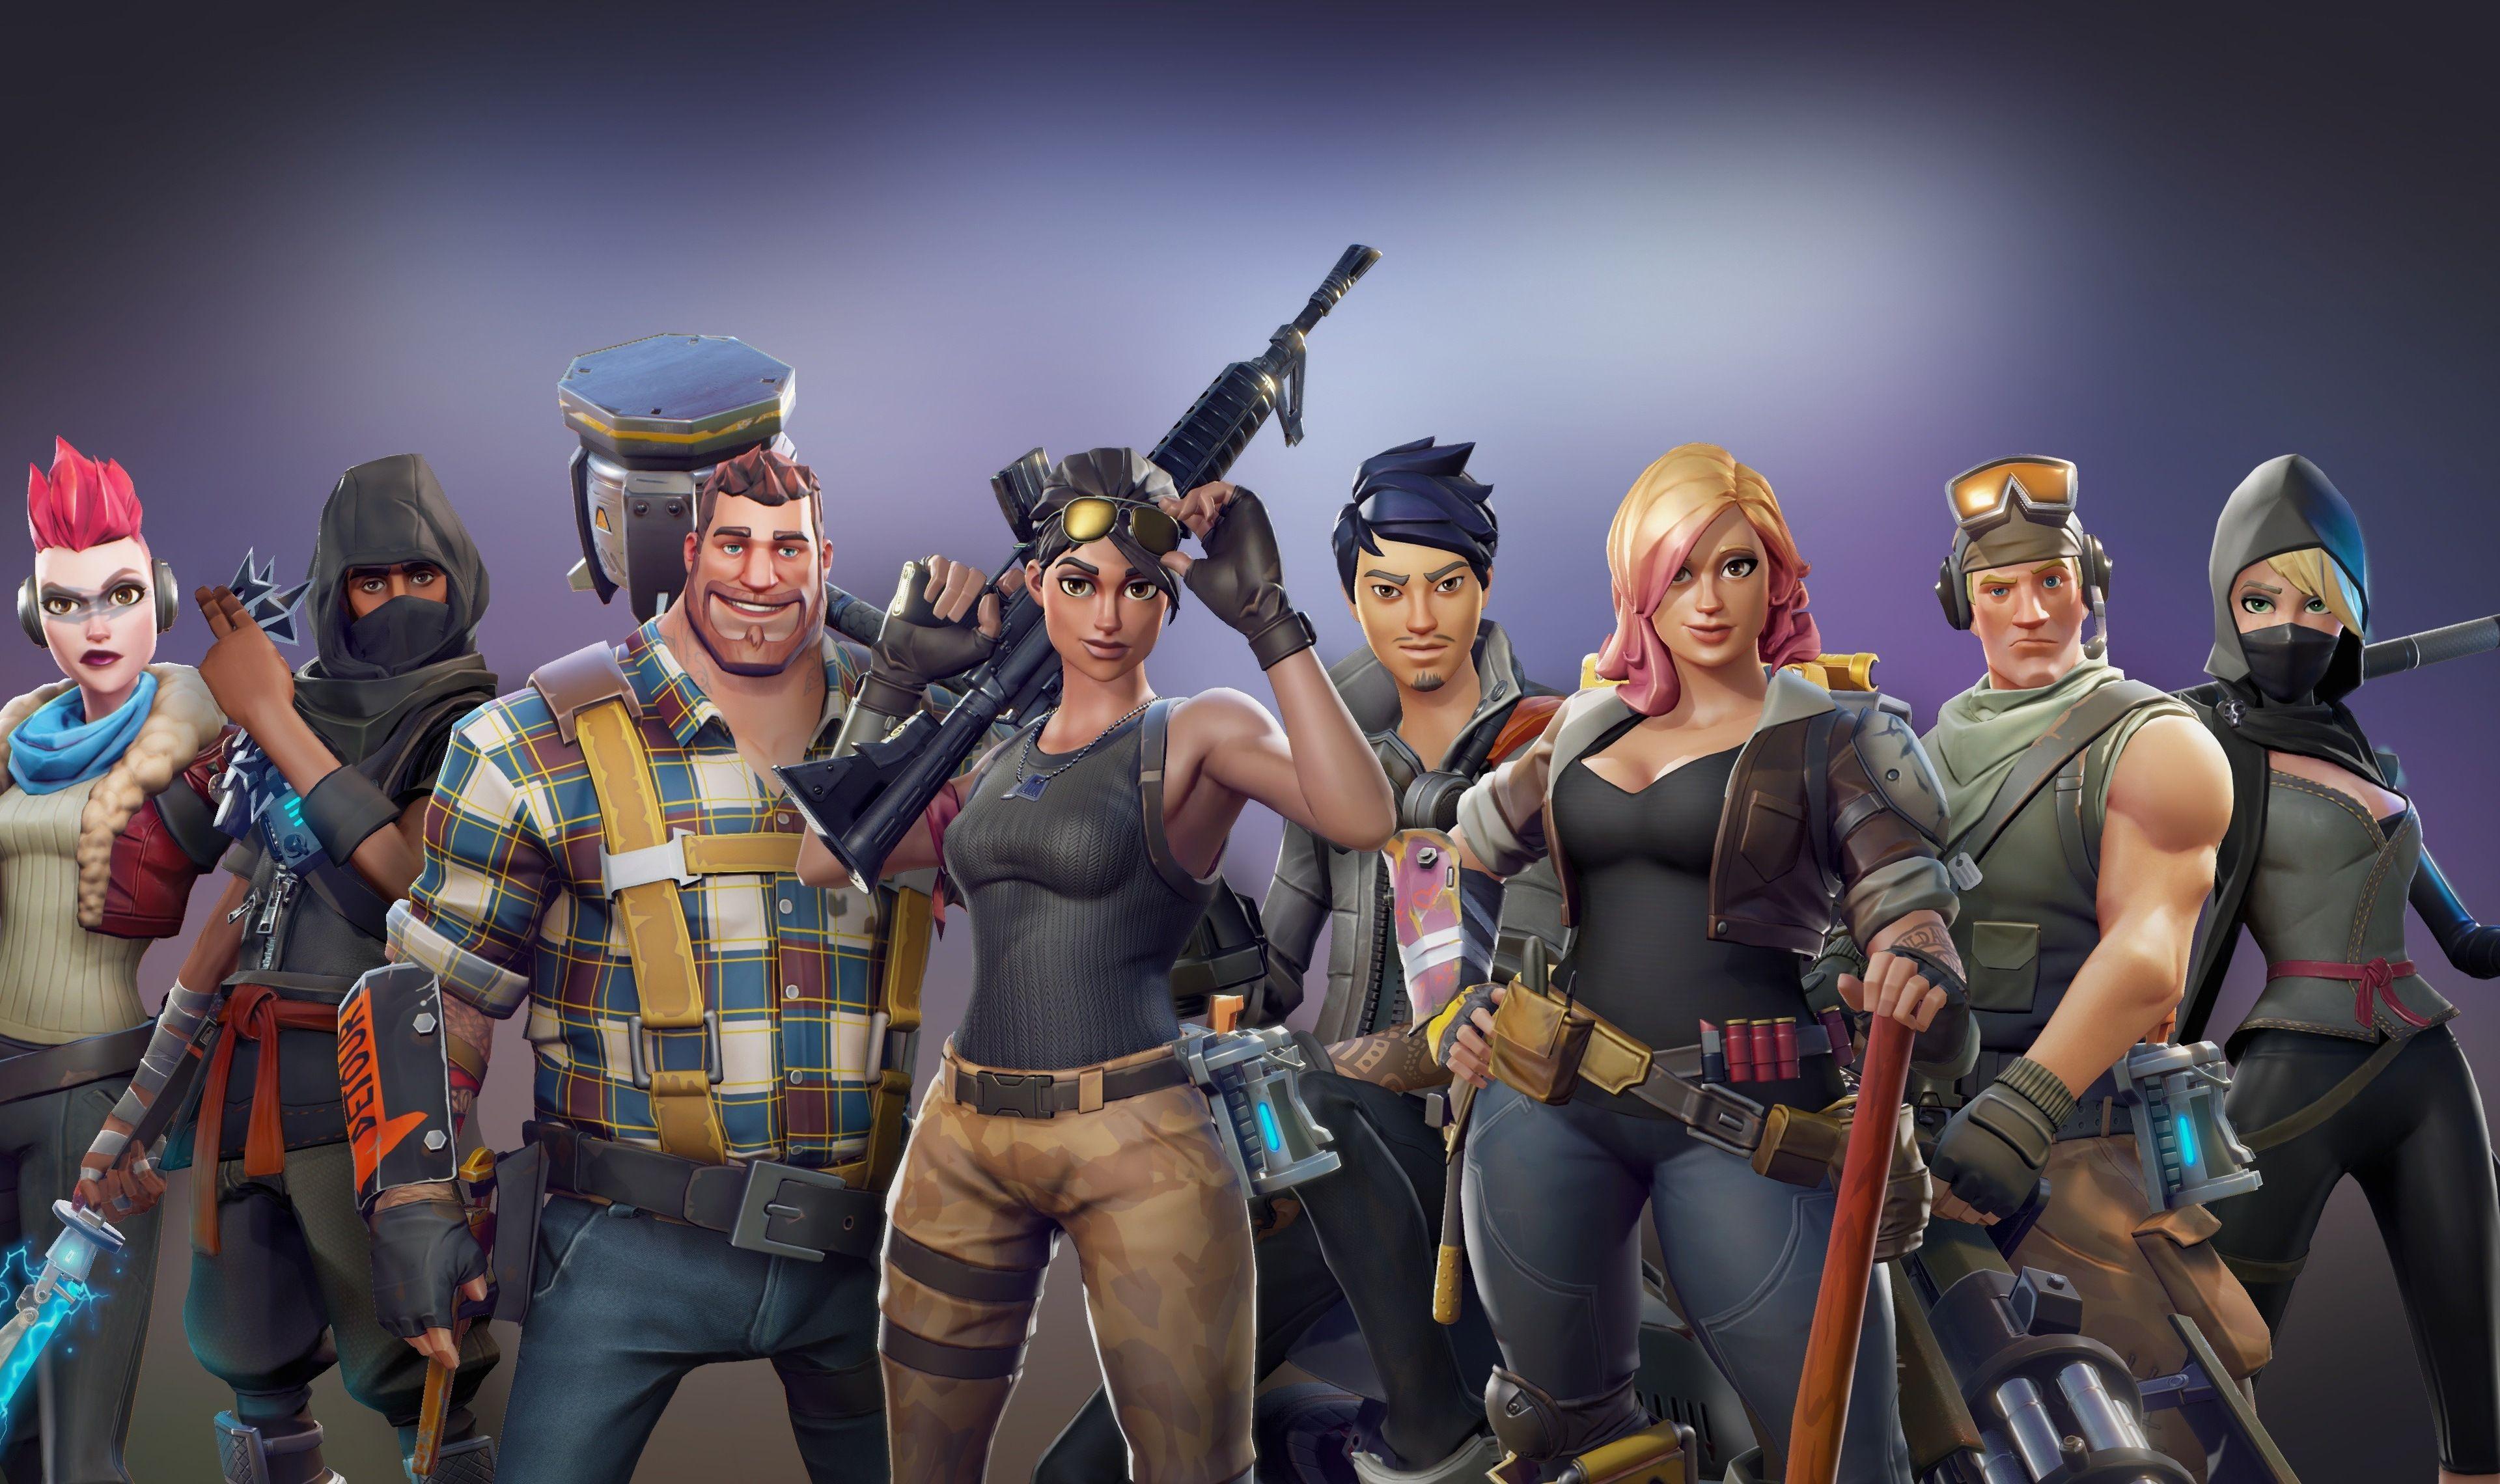 Download 3840x2400 wallpaper all characters, video game, fortnite